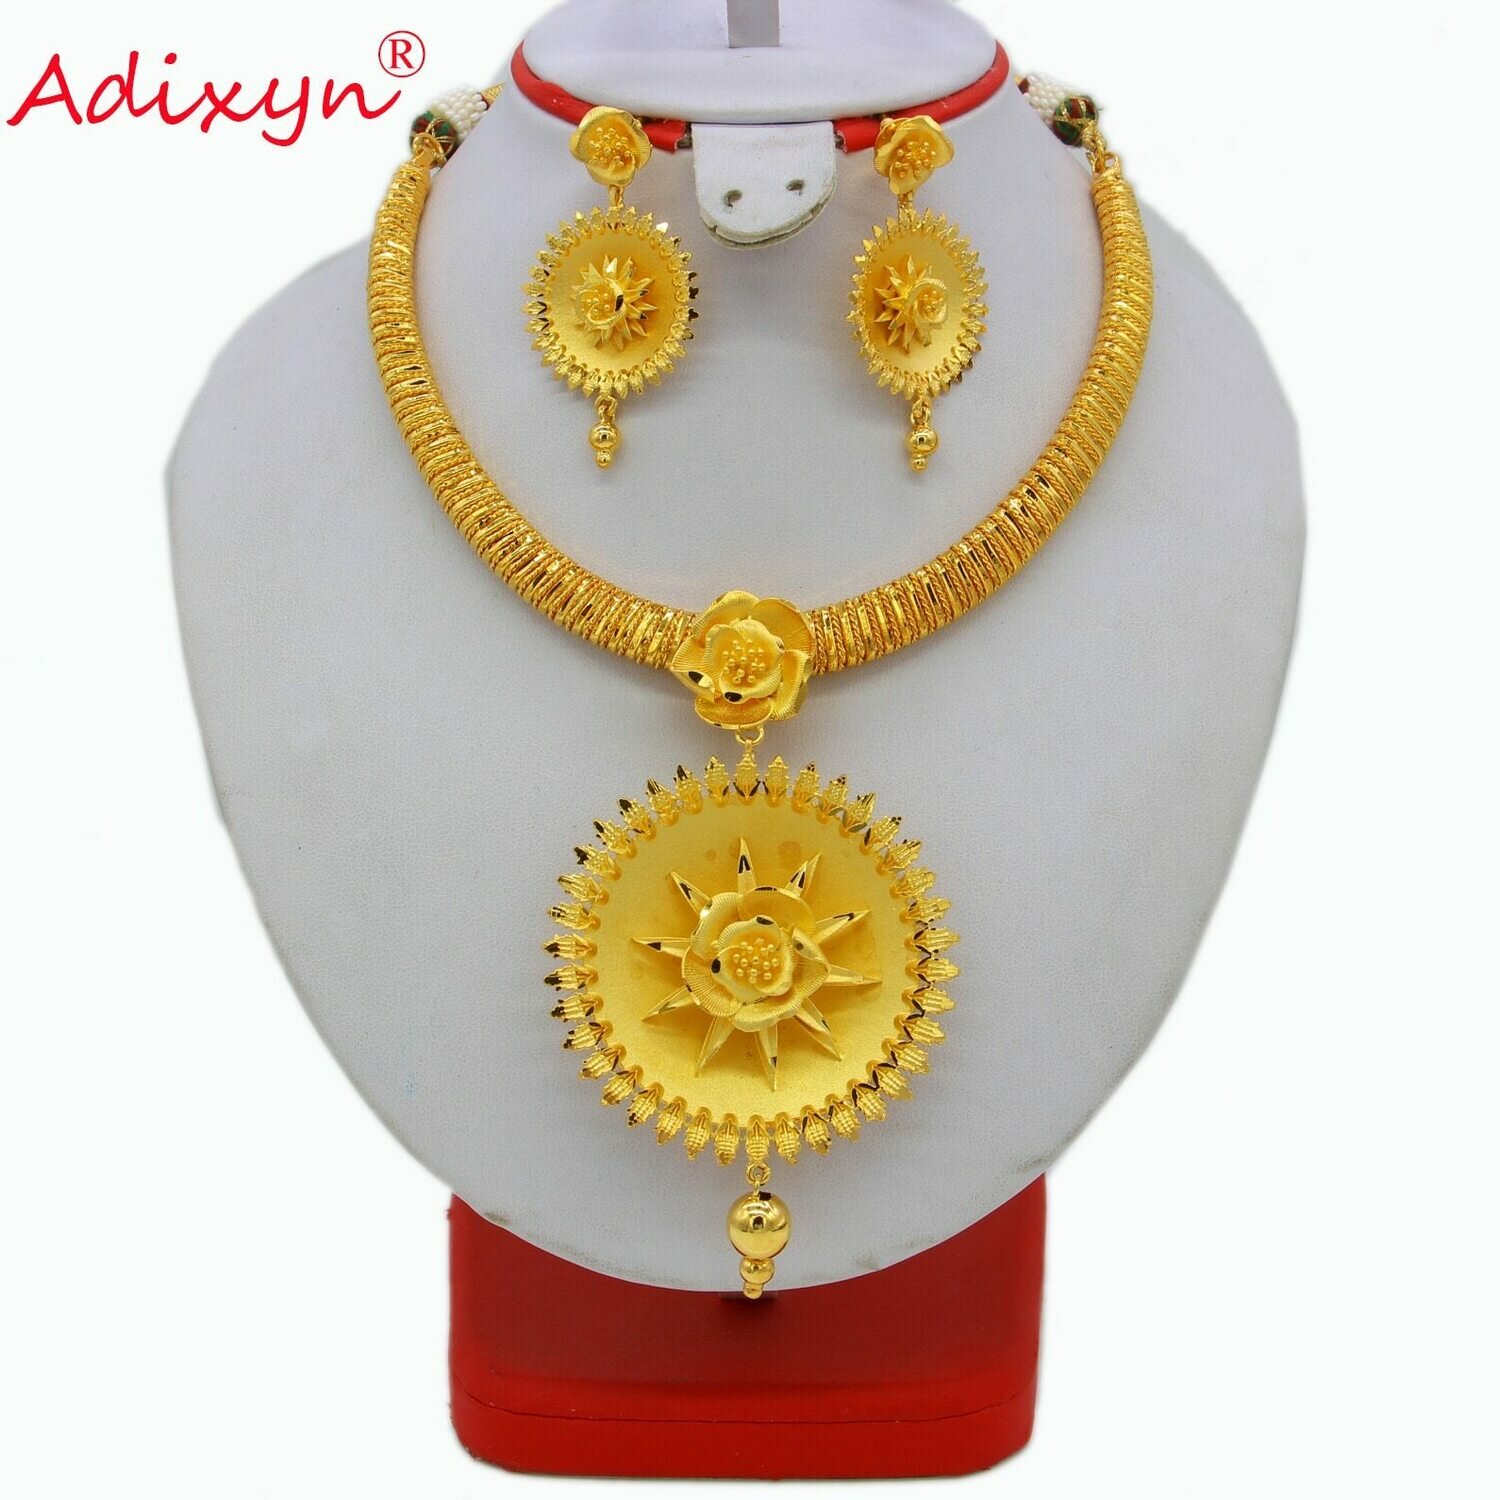 Jewelry-Set Earrings Necklace Gold-Color/copper-Jewelry African/ethiopian India Wedding-Gifts